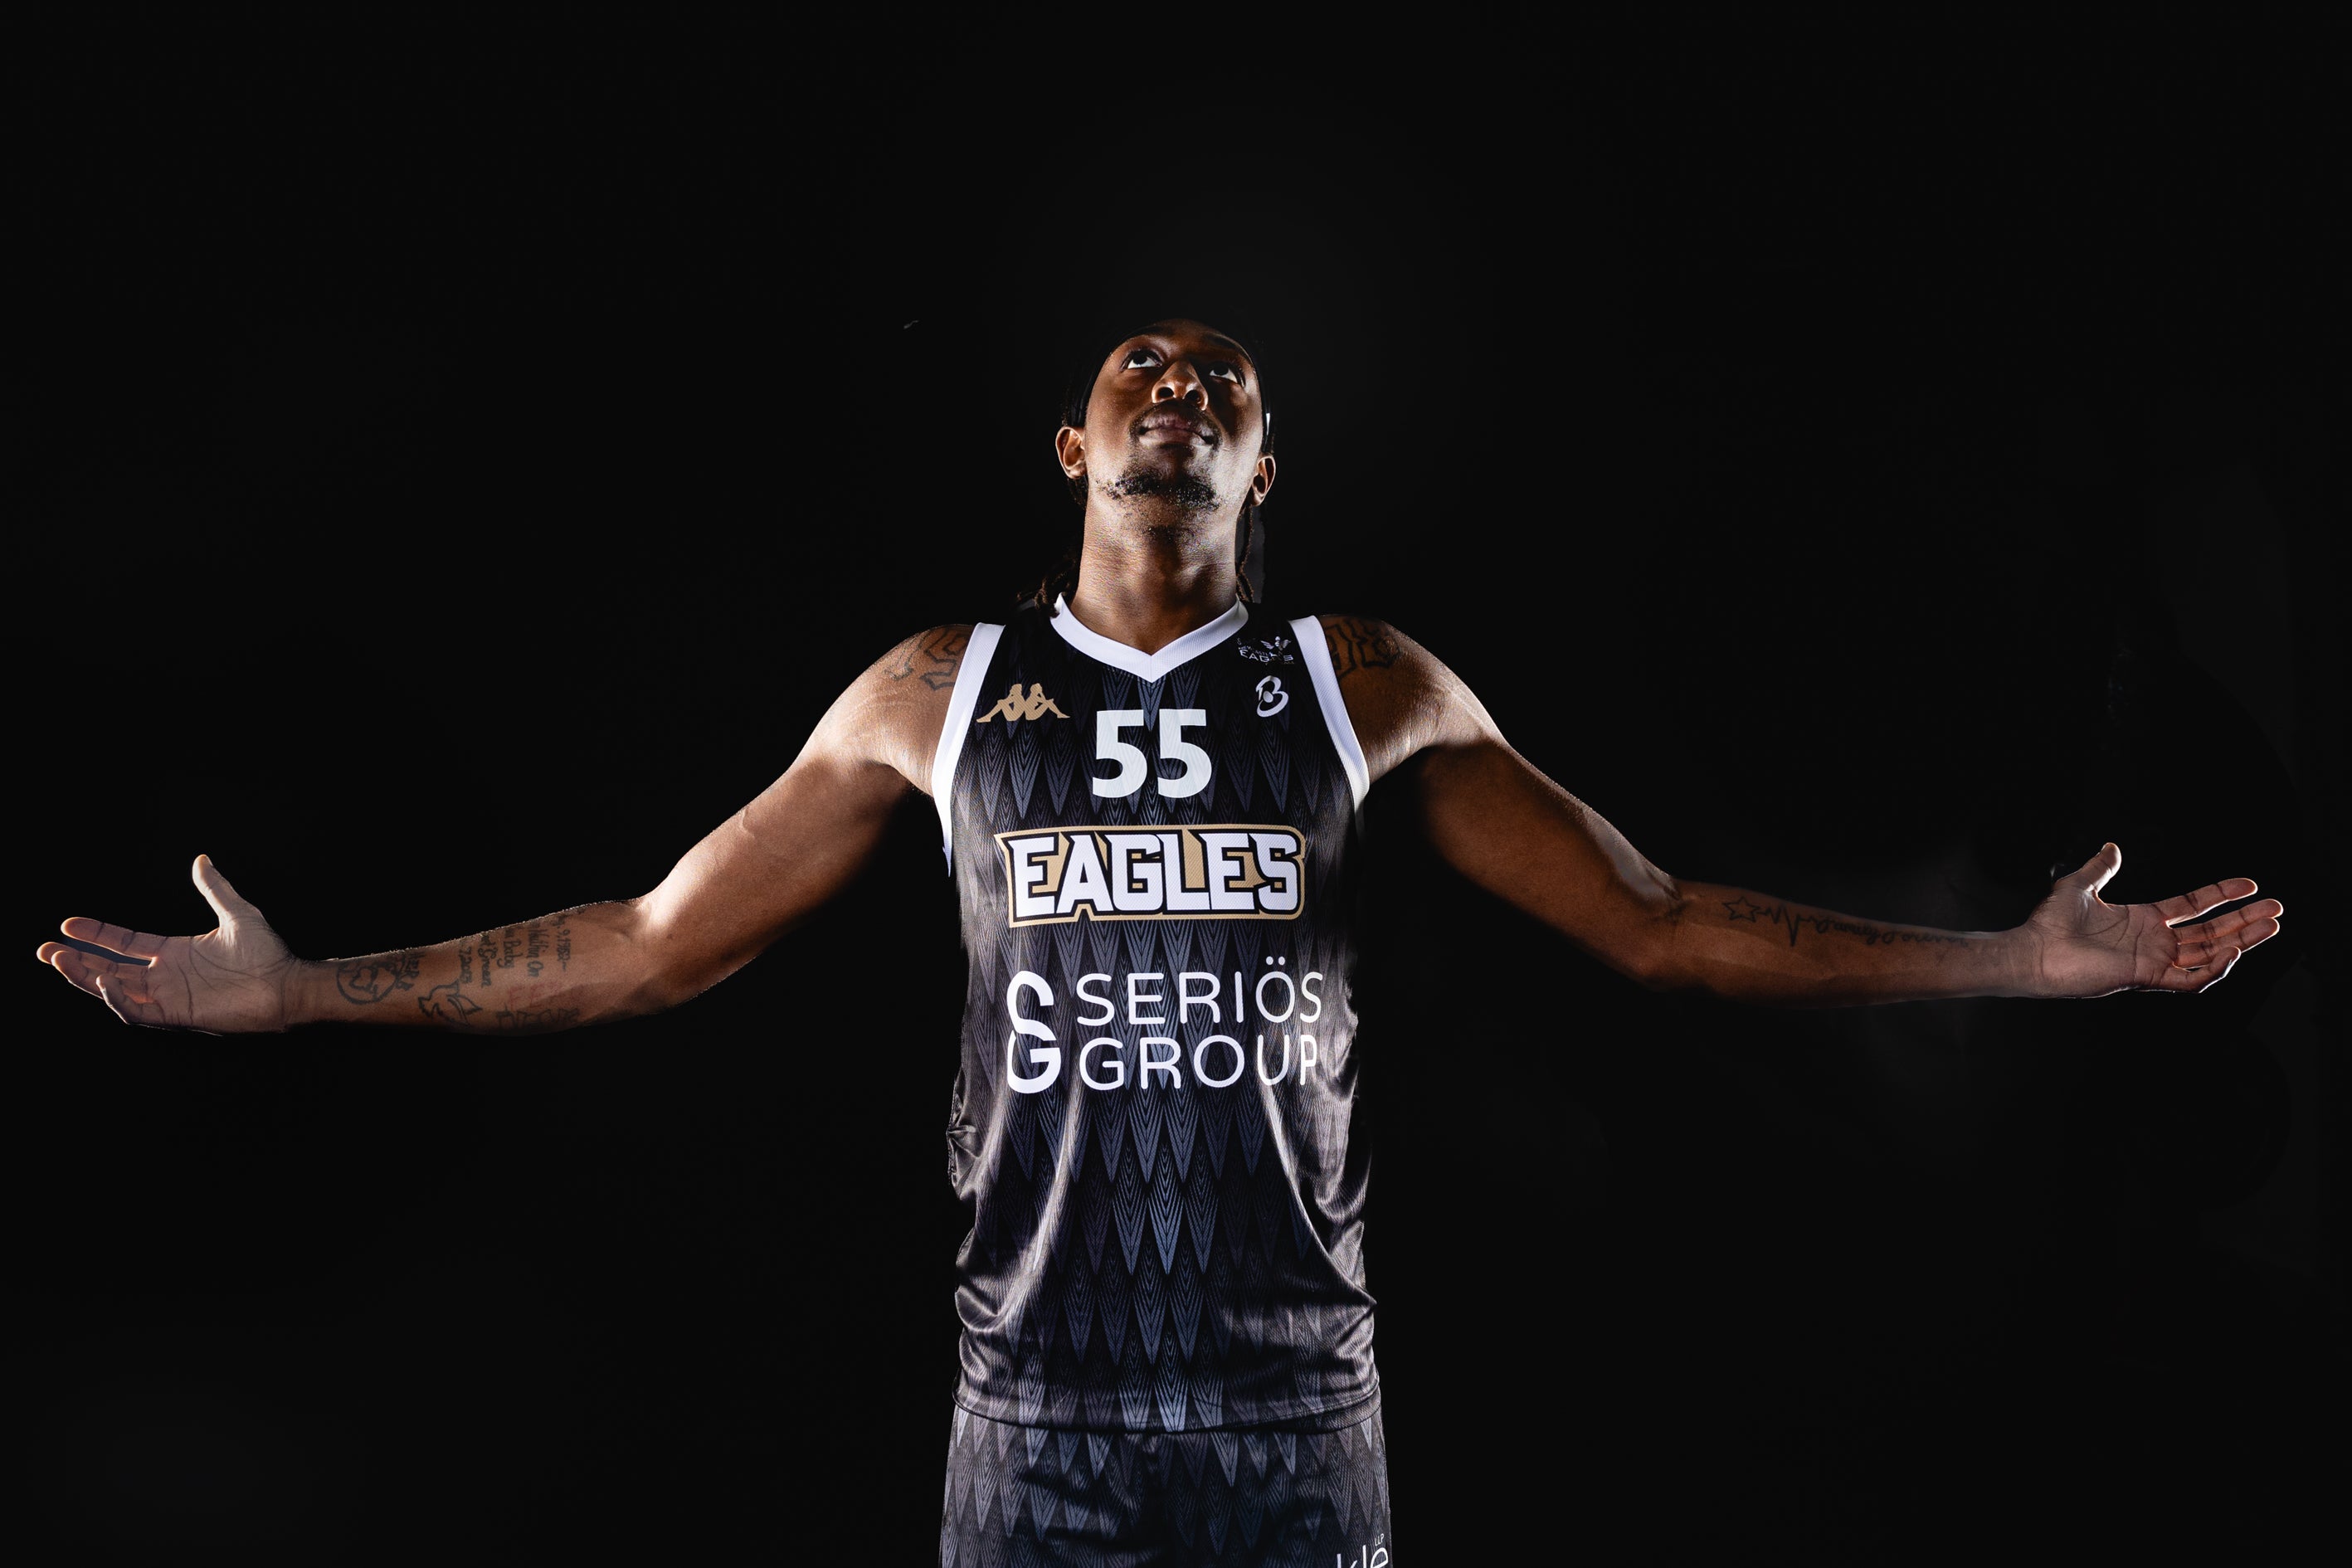 Newcastle Eagles playing wearing Kappa kit with arms wide open looking up